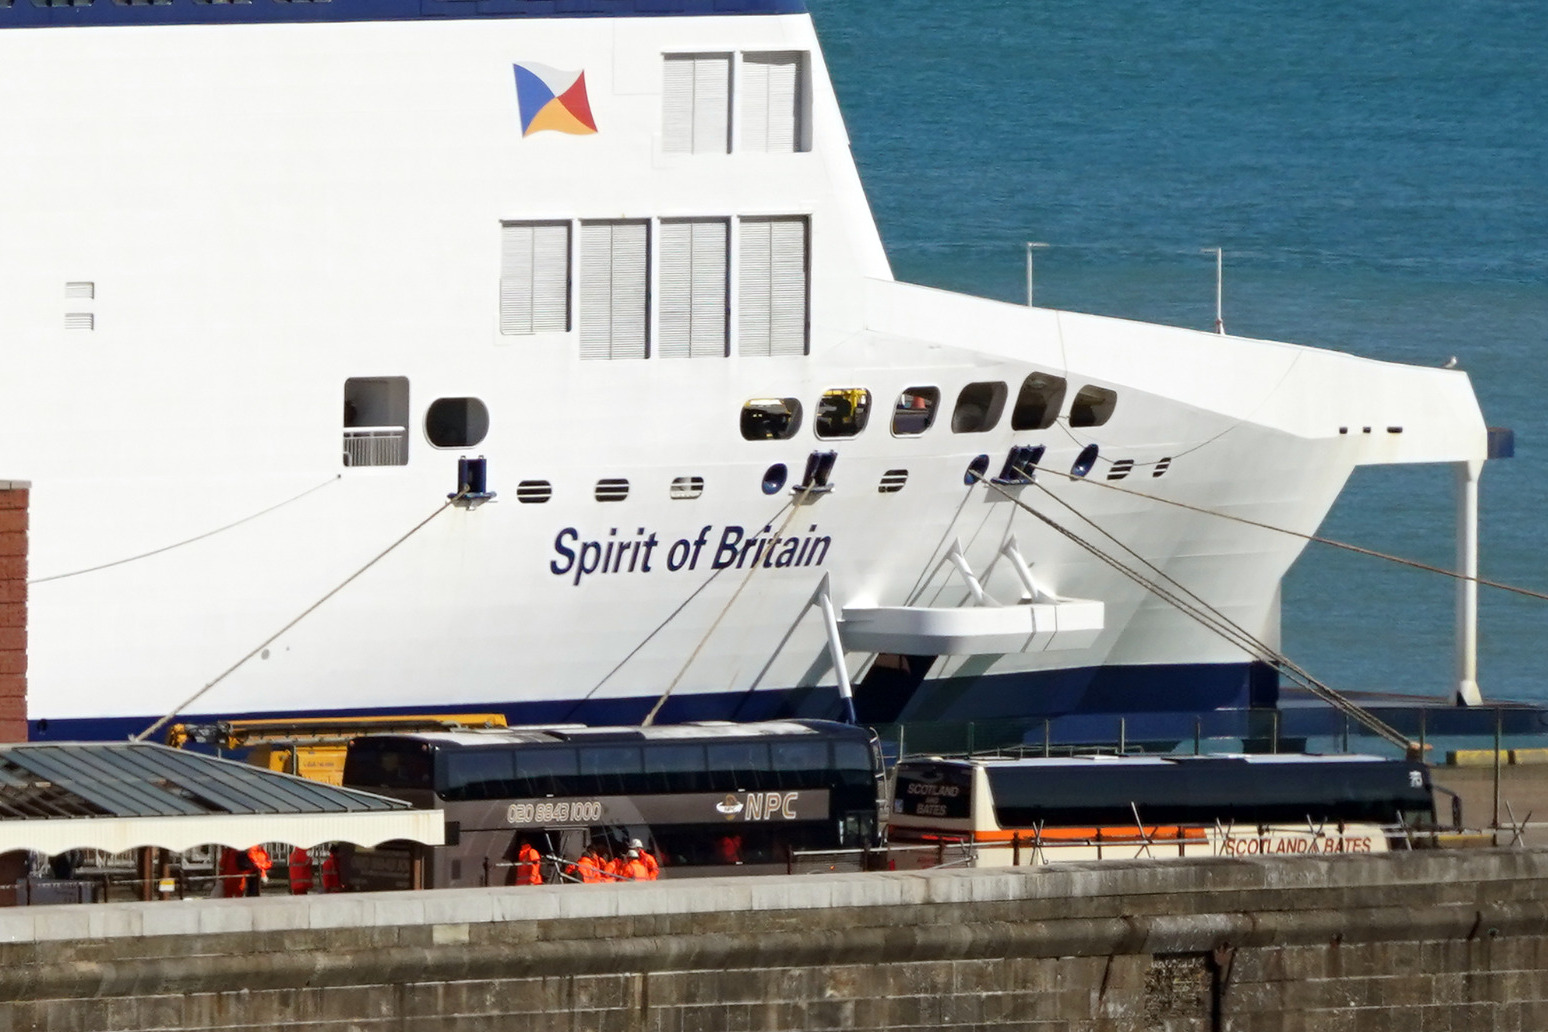 PO Ferries boat Spirit of Britain detained